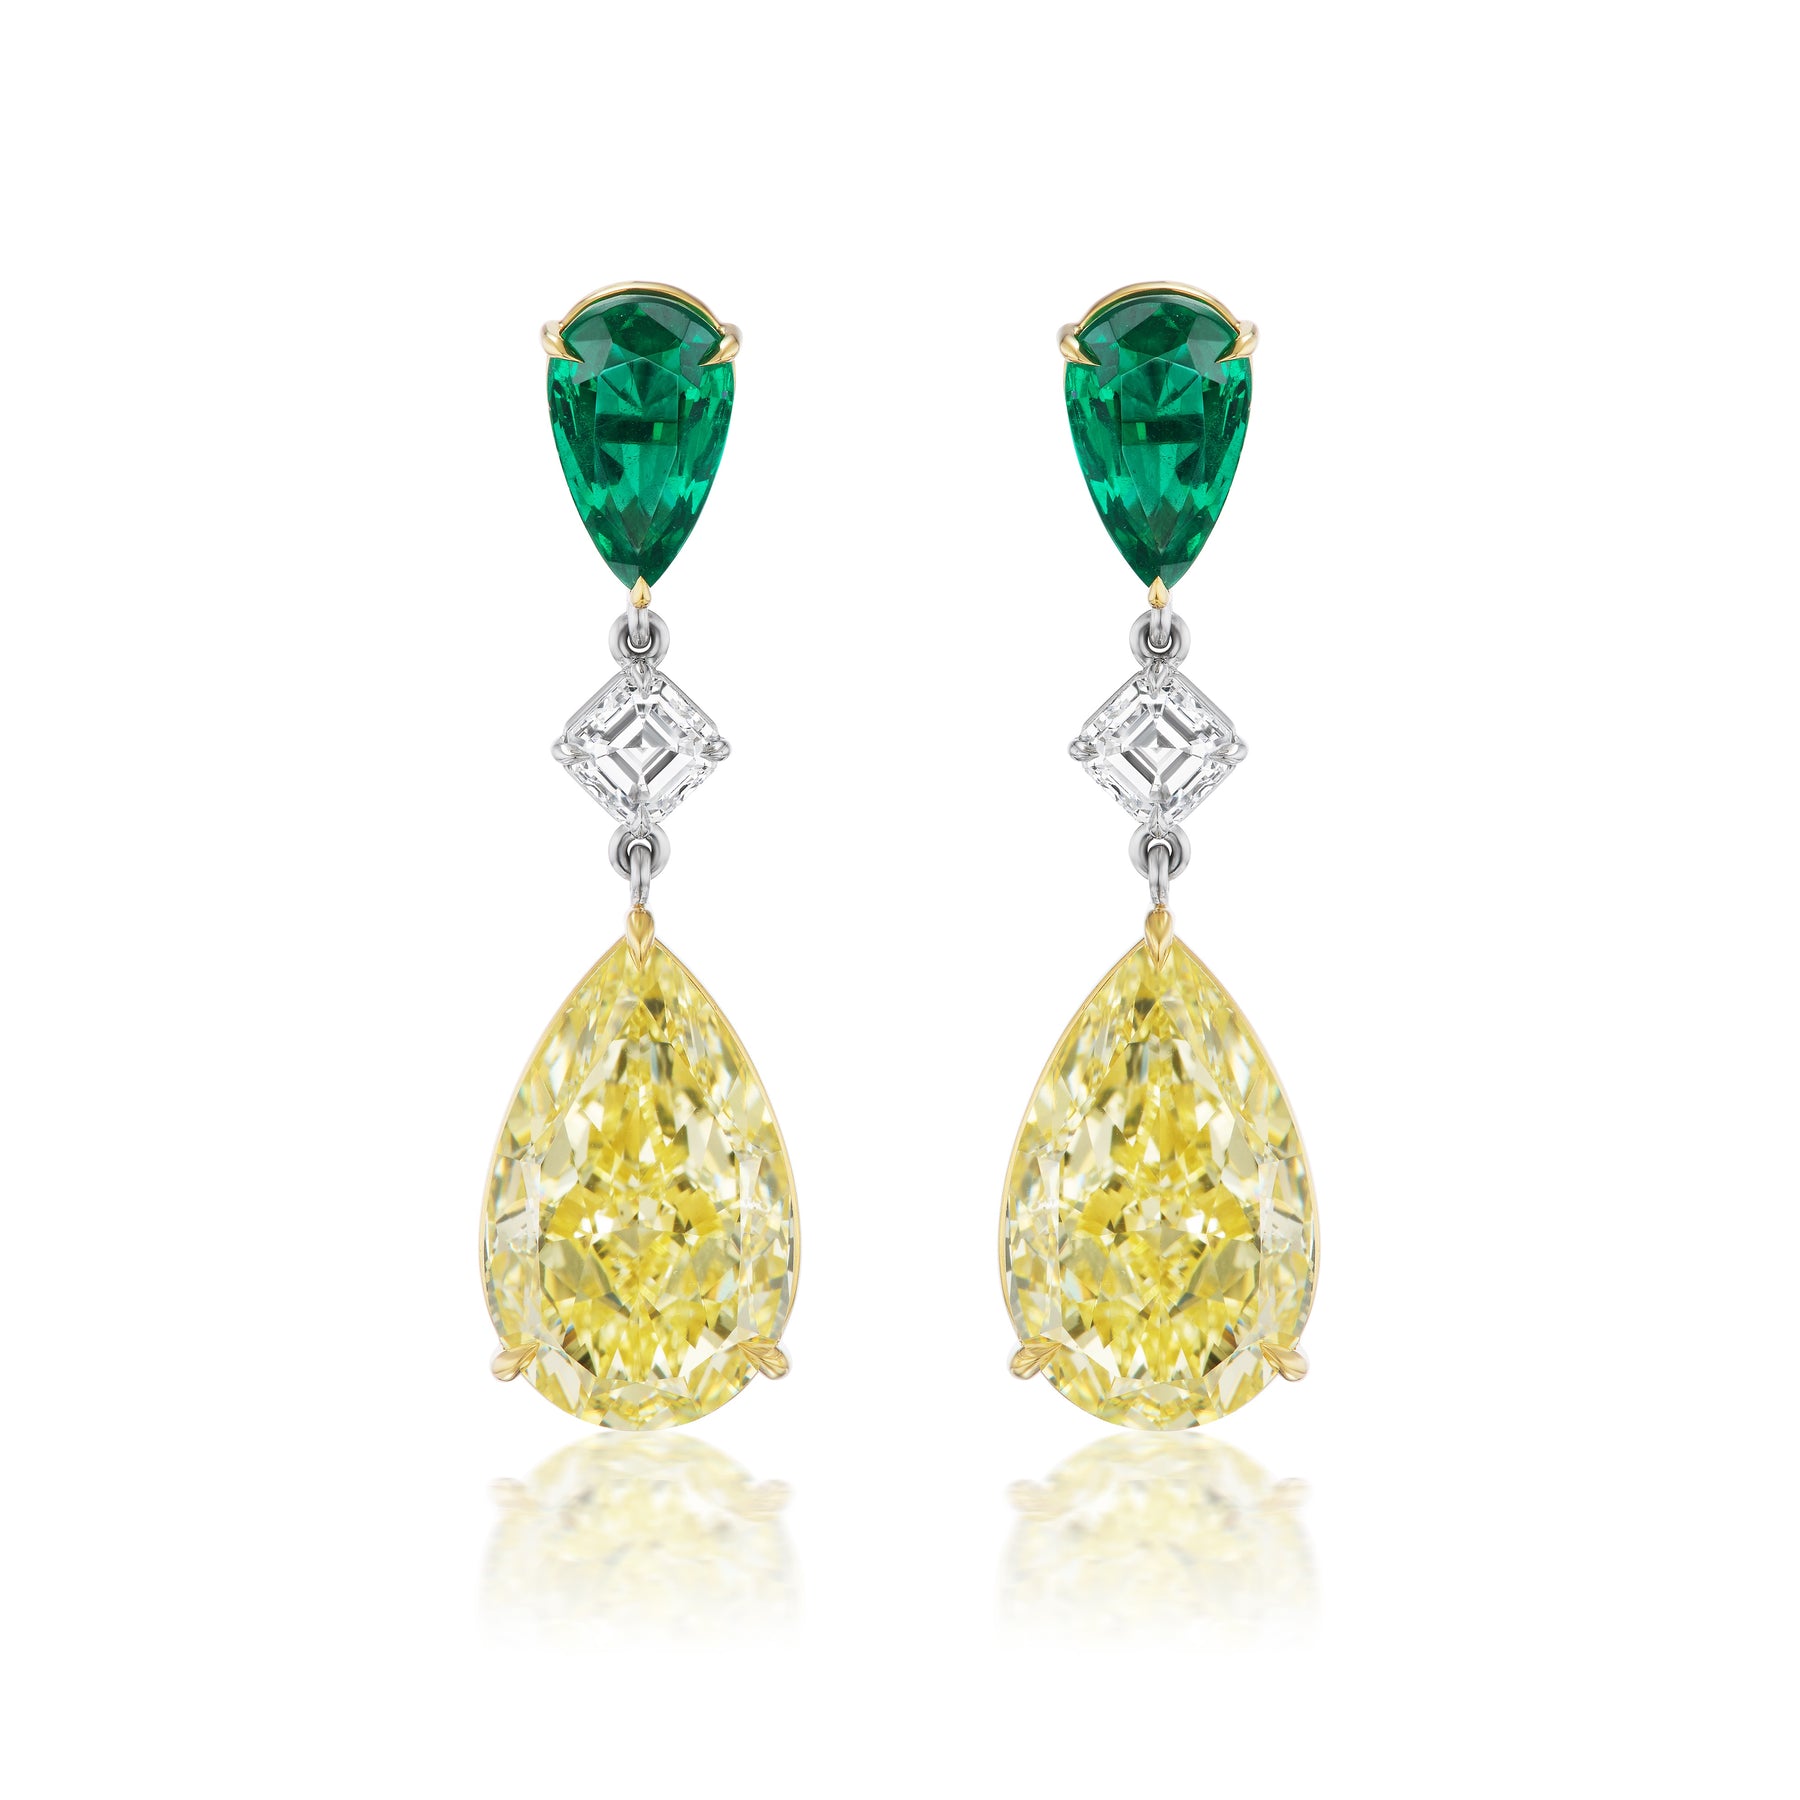 Drop Earrings in Yellow Gold with Pear Shape Emeralds, Yellow Diamonds, and Asscher Cut Diamonds